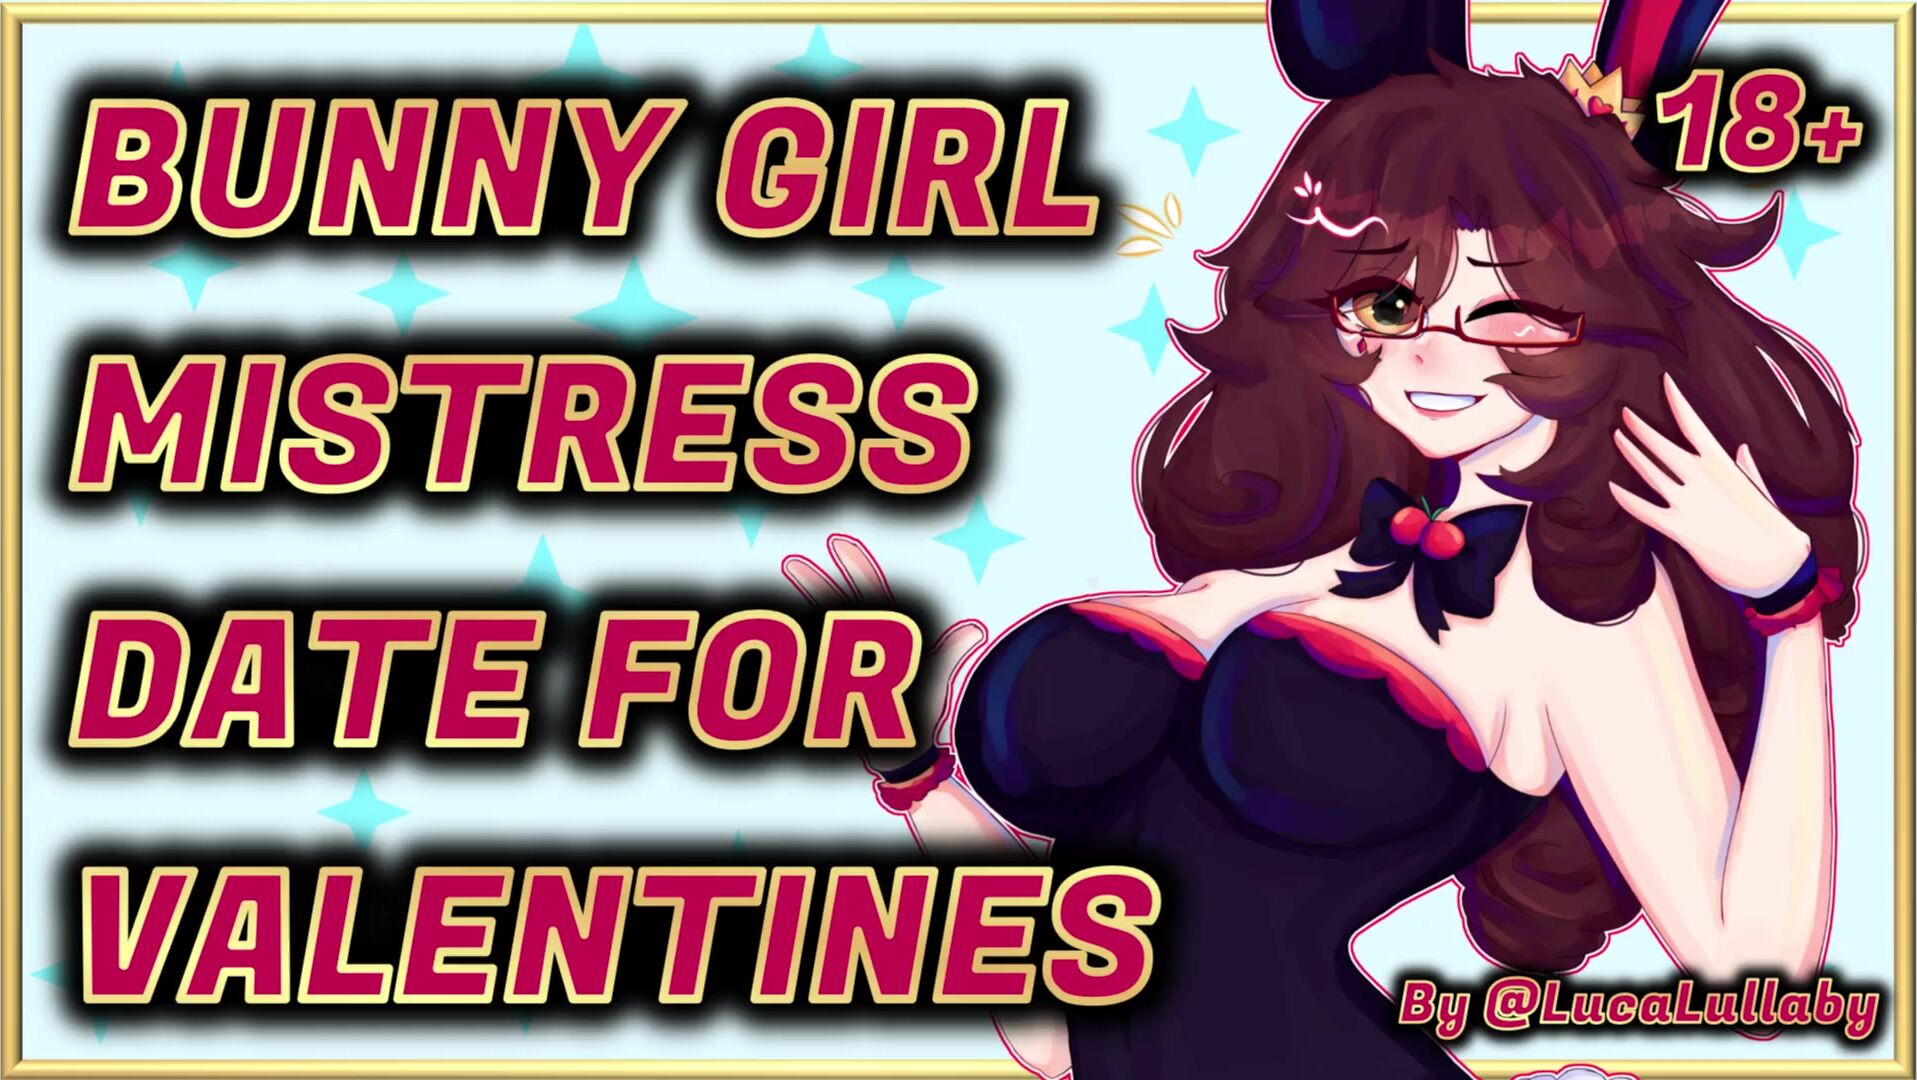 Bunny Girl Mistress - Date For Valentines